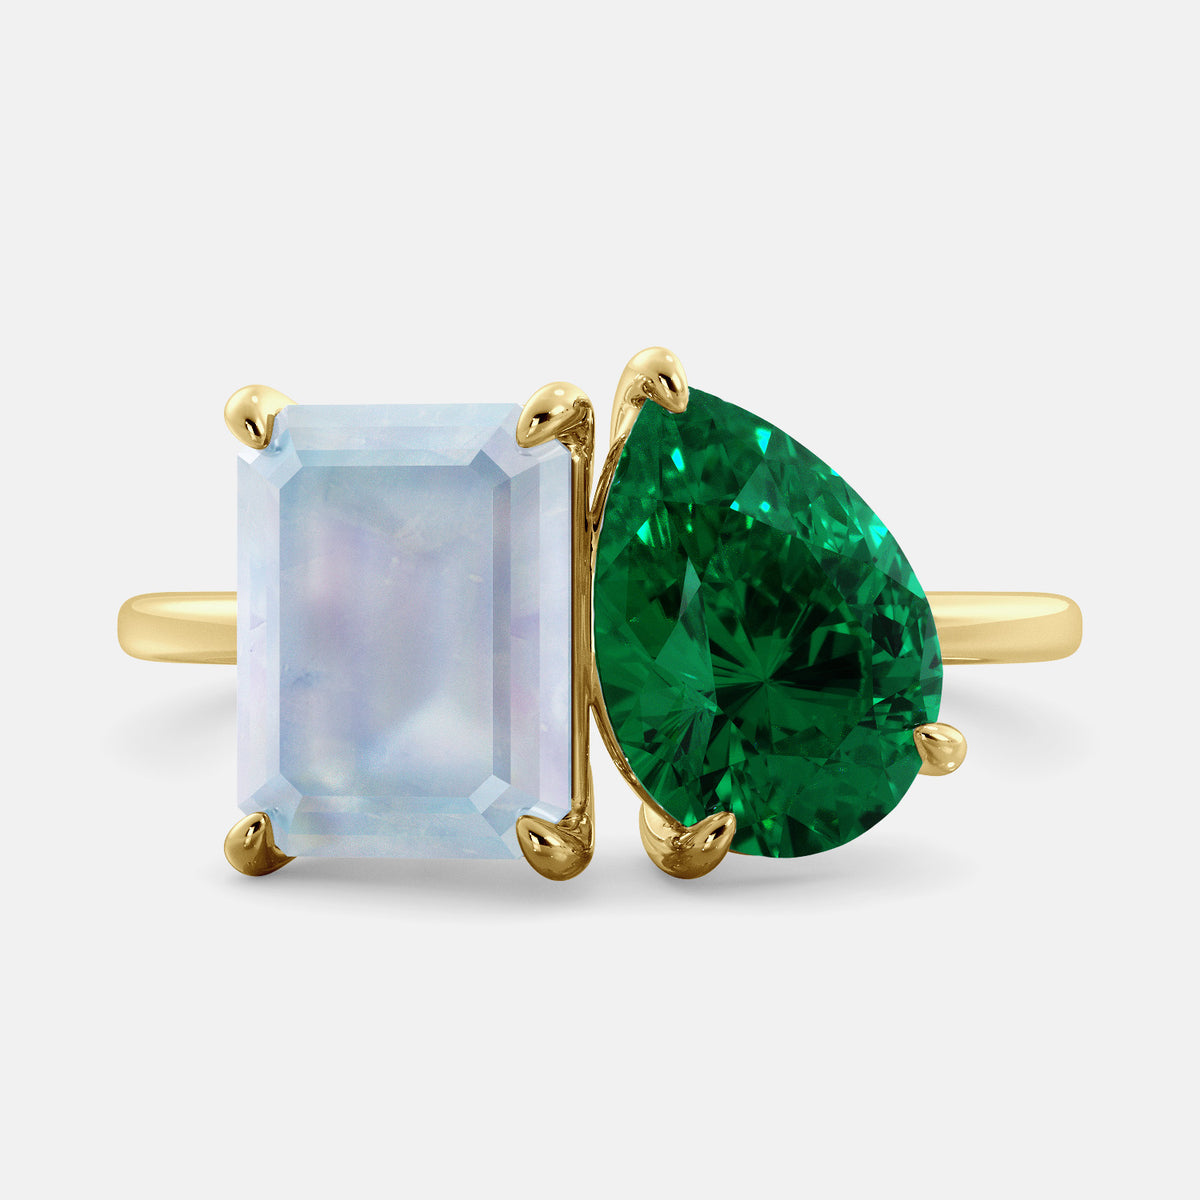 This image shows a toi et moi ring with a pear-shaped emerald and an emerald-cut moonstone. The ring is set in a 14k yellow gold band and is available in all sizes. The moonstone is a gemstone that is said to promote intuition, imagination, and creativity. The emerald is a gemstone that is said to promote love, compassion, and forgiveness. The toi et moi ring is a beautiful and unique way to show your love and commitment to someone special.